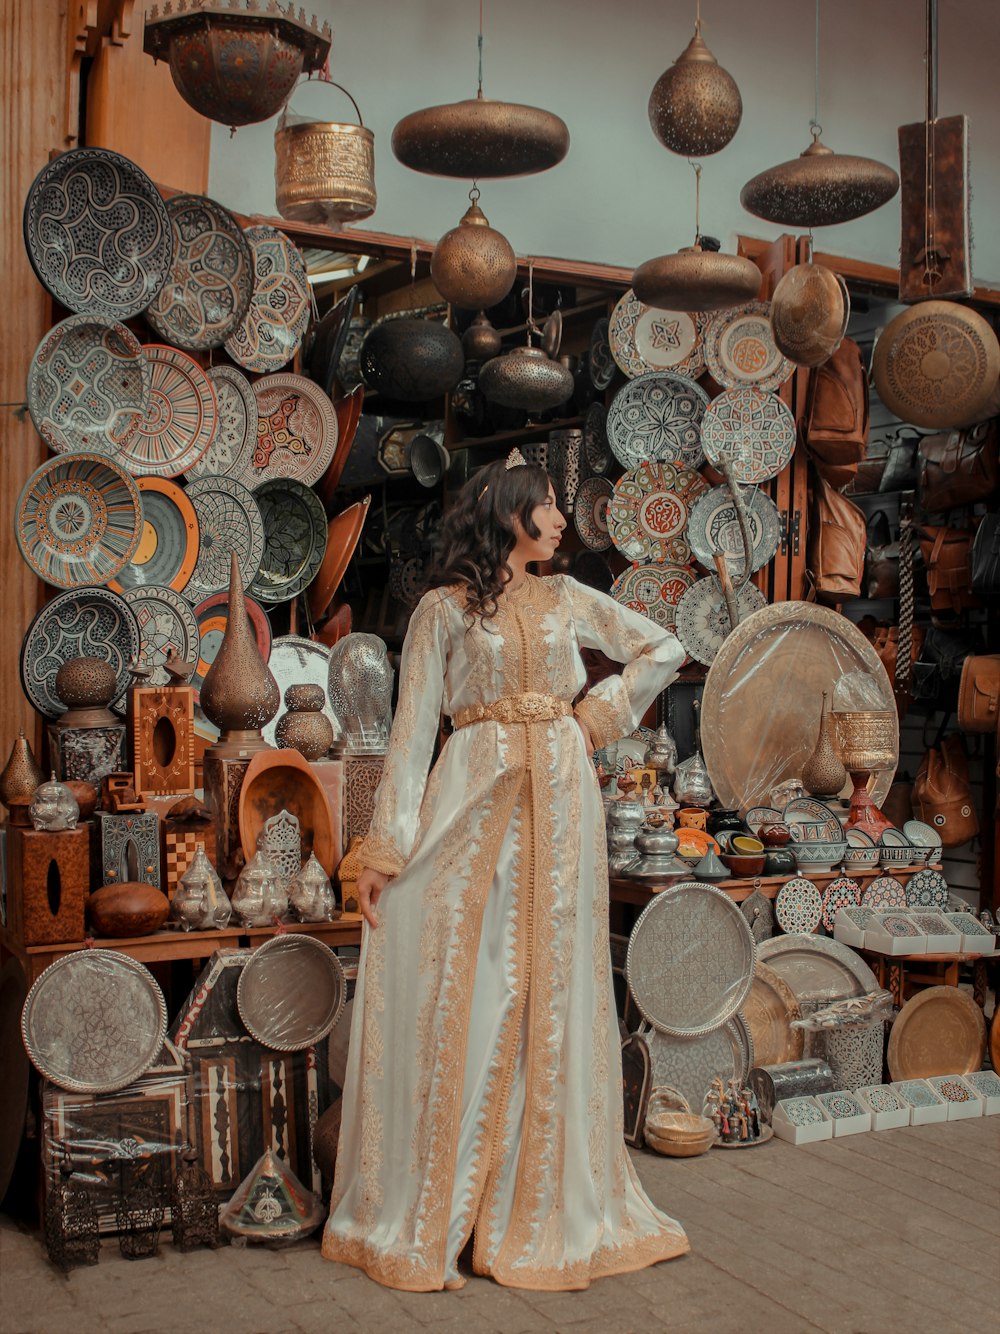 a woman standing in front of a display of pottery